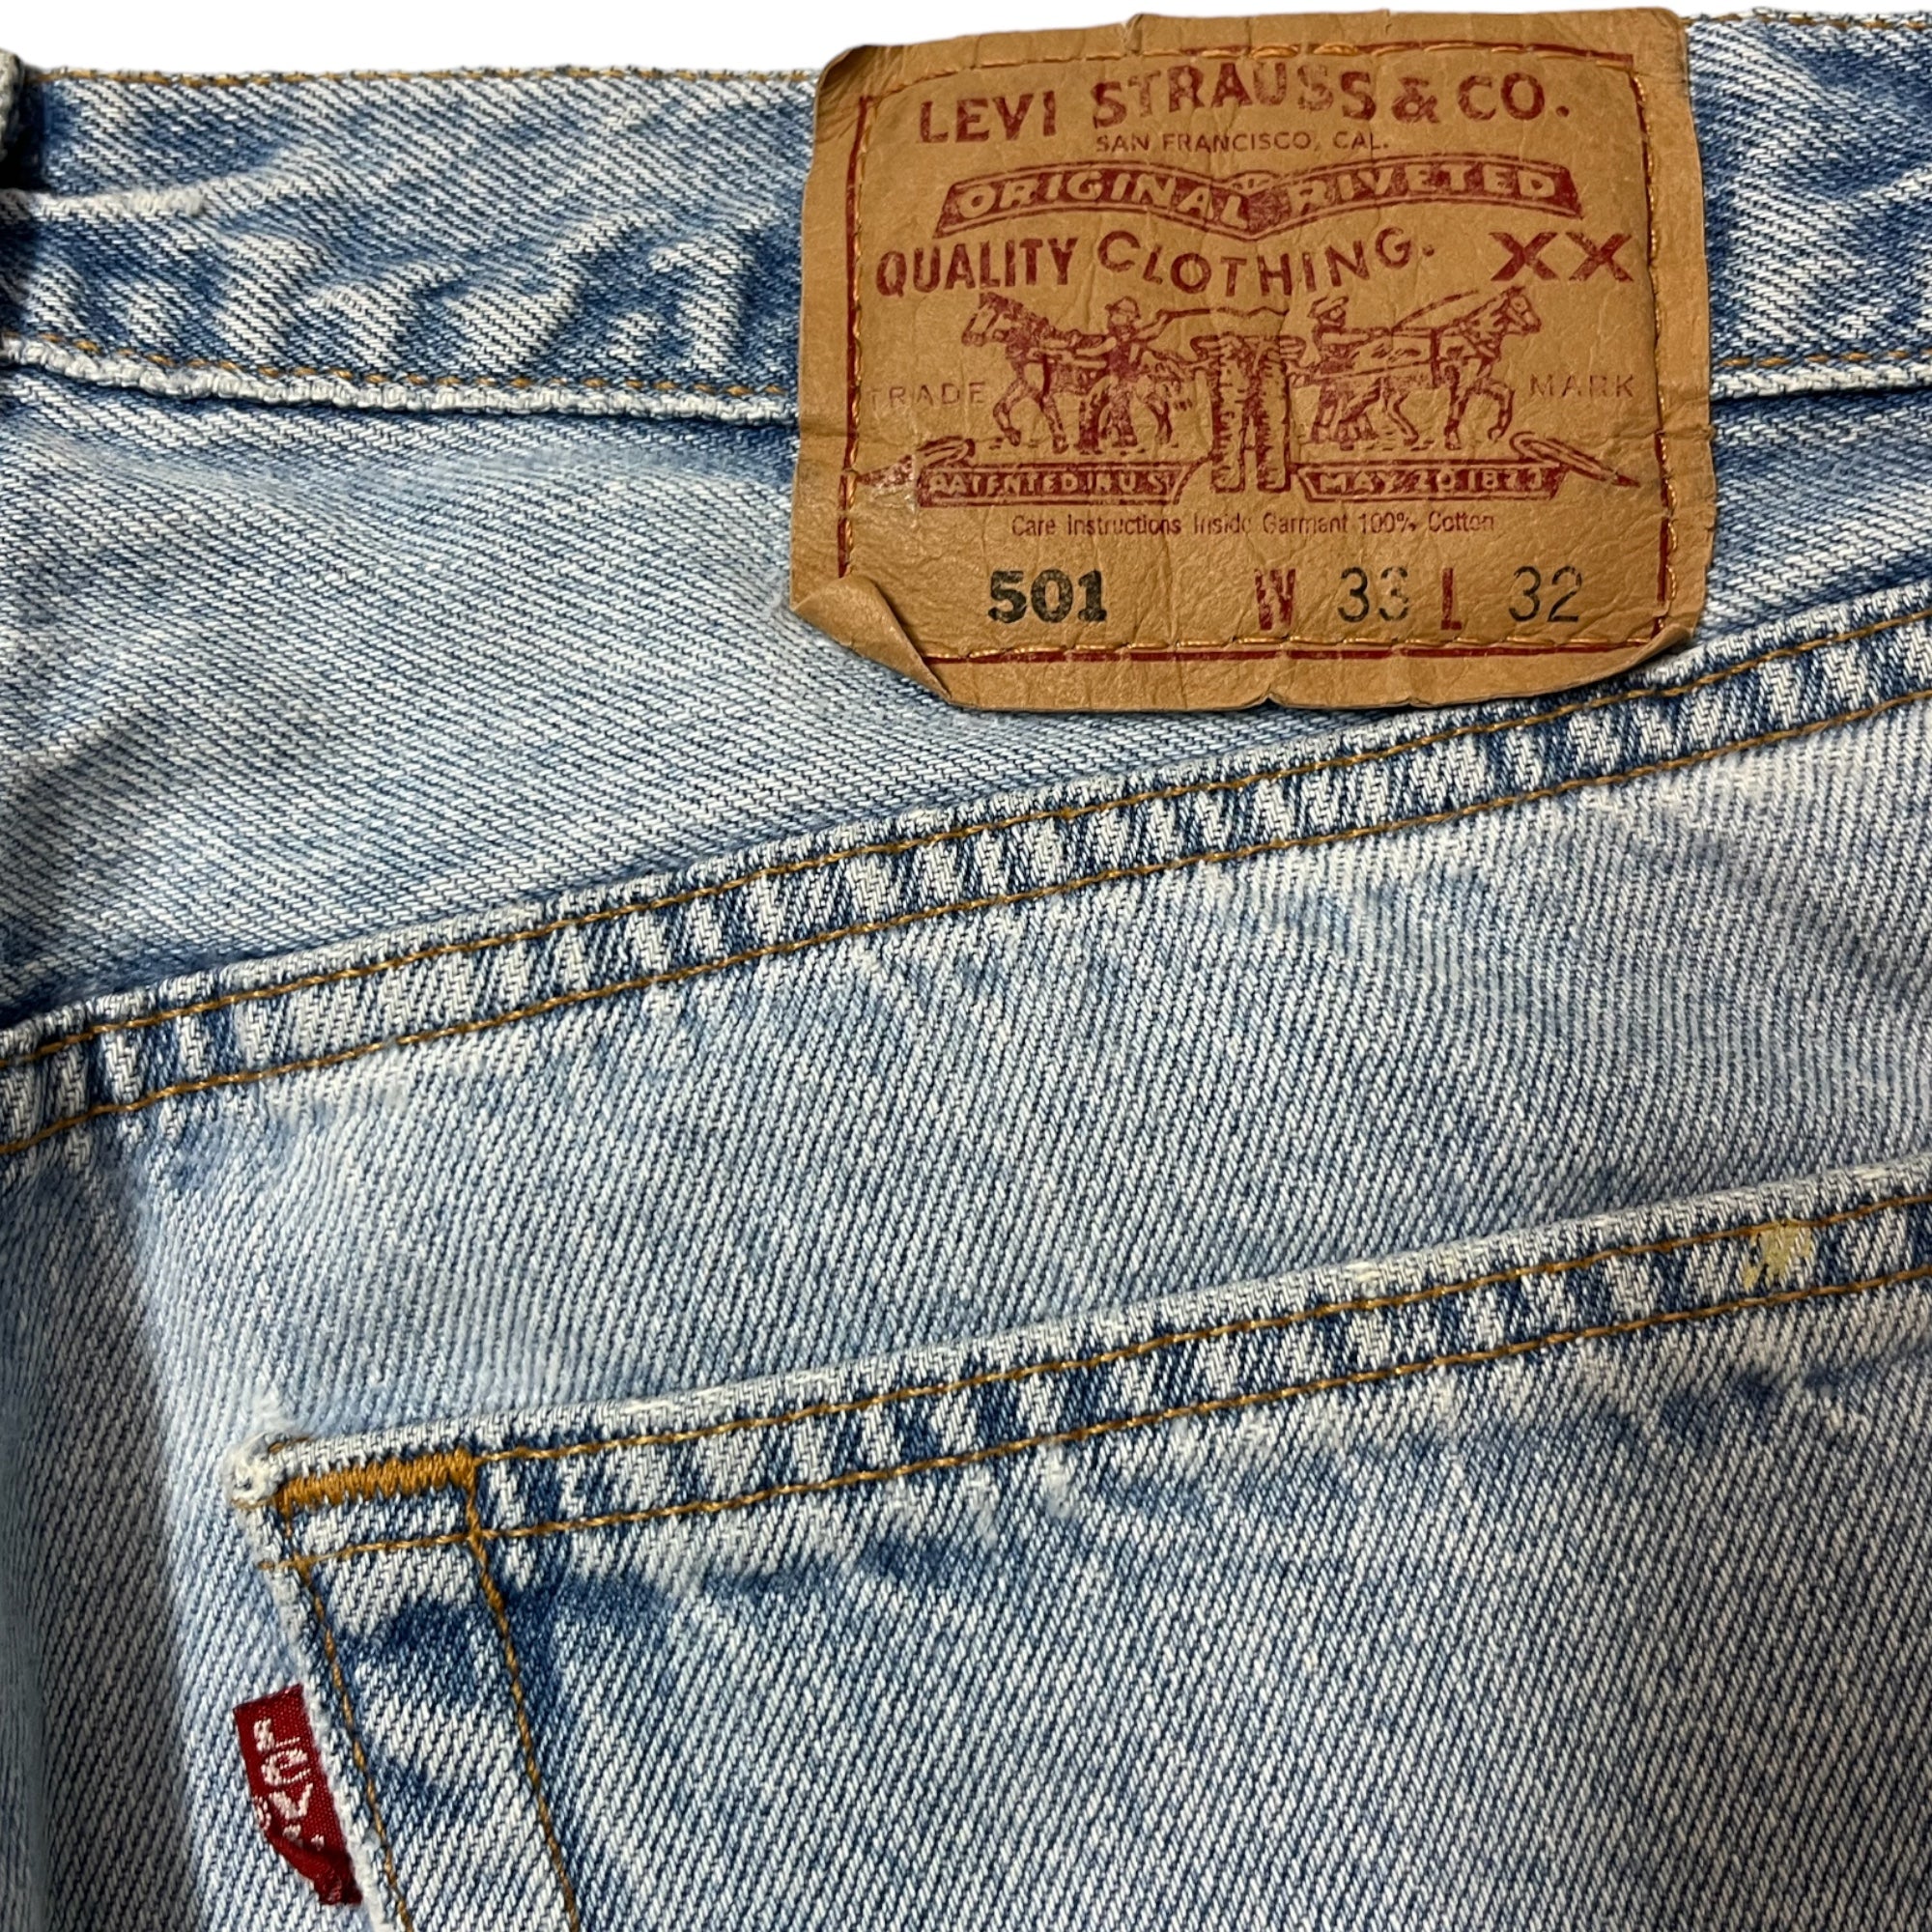 Late 1980s Levi’s Made in USA 501 Painter Jeans - Light Wash Blue - 32x31